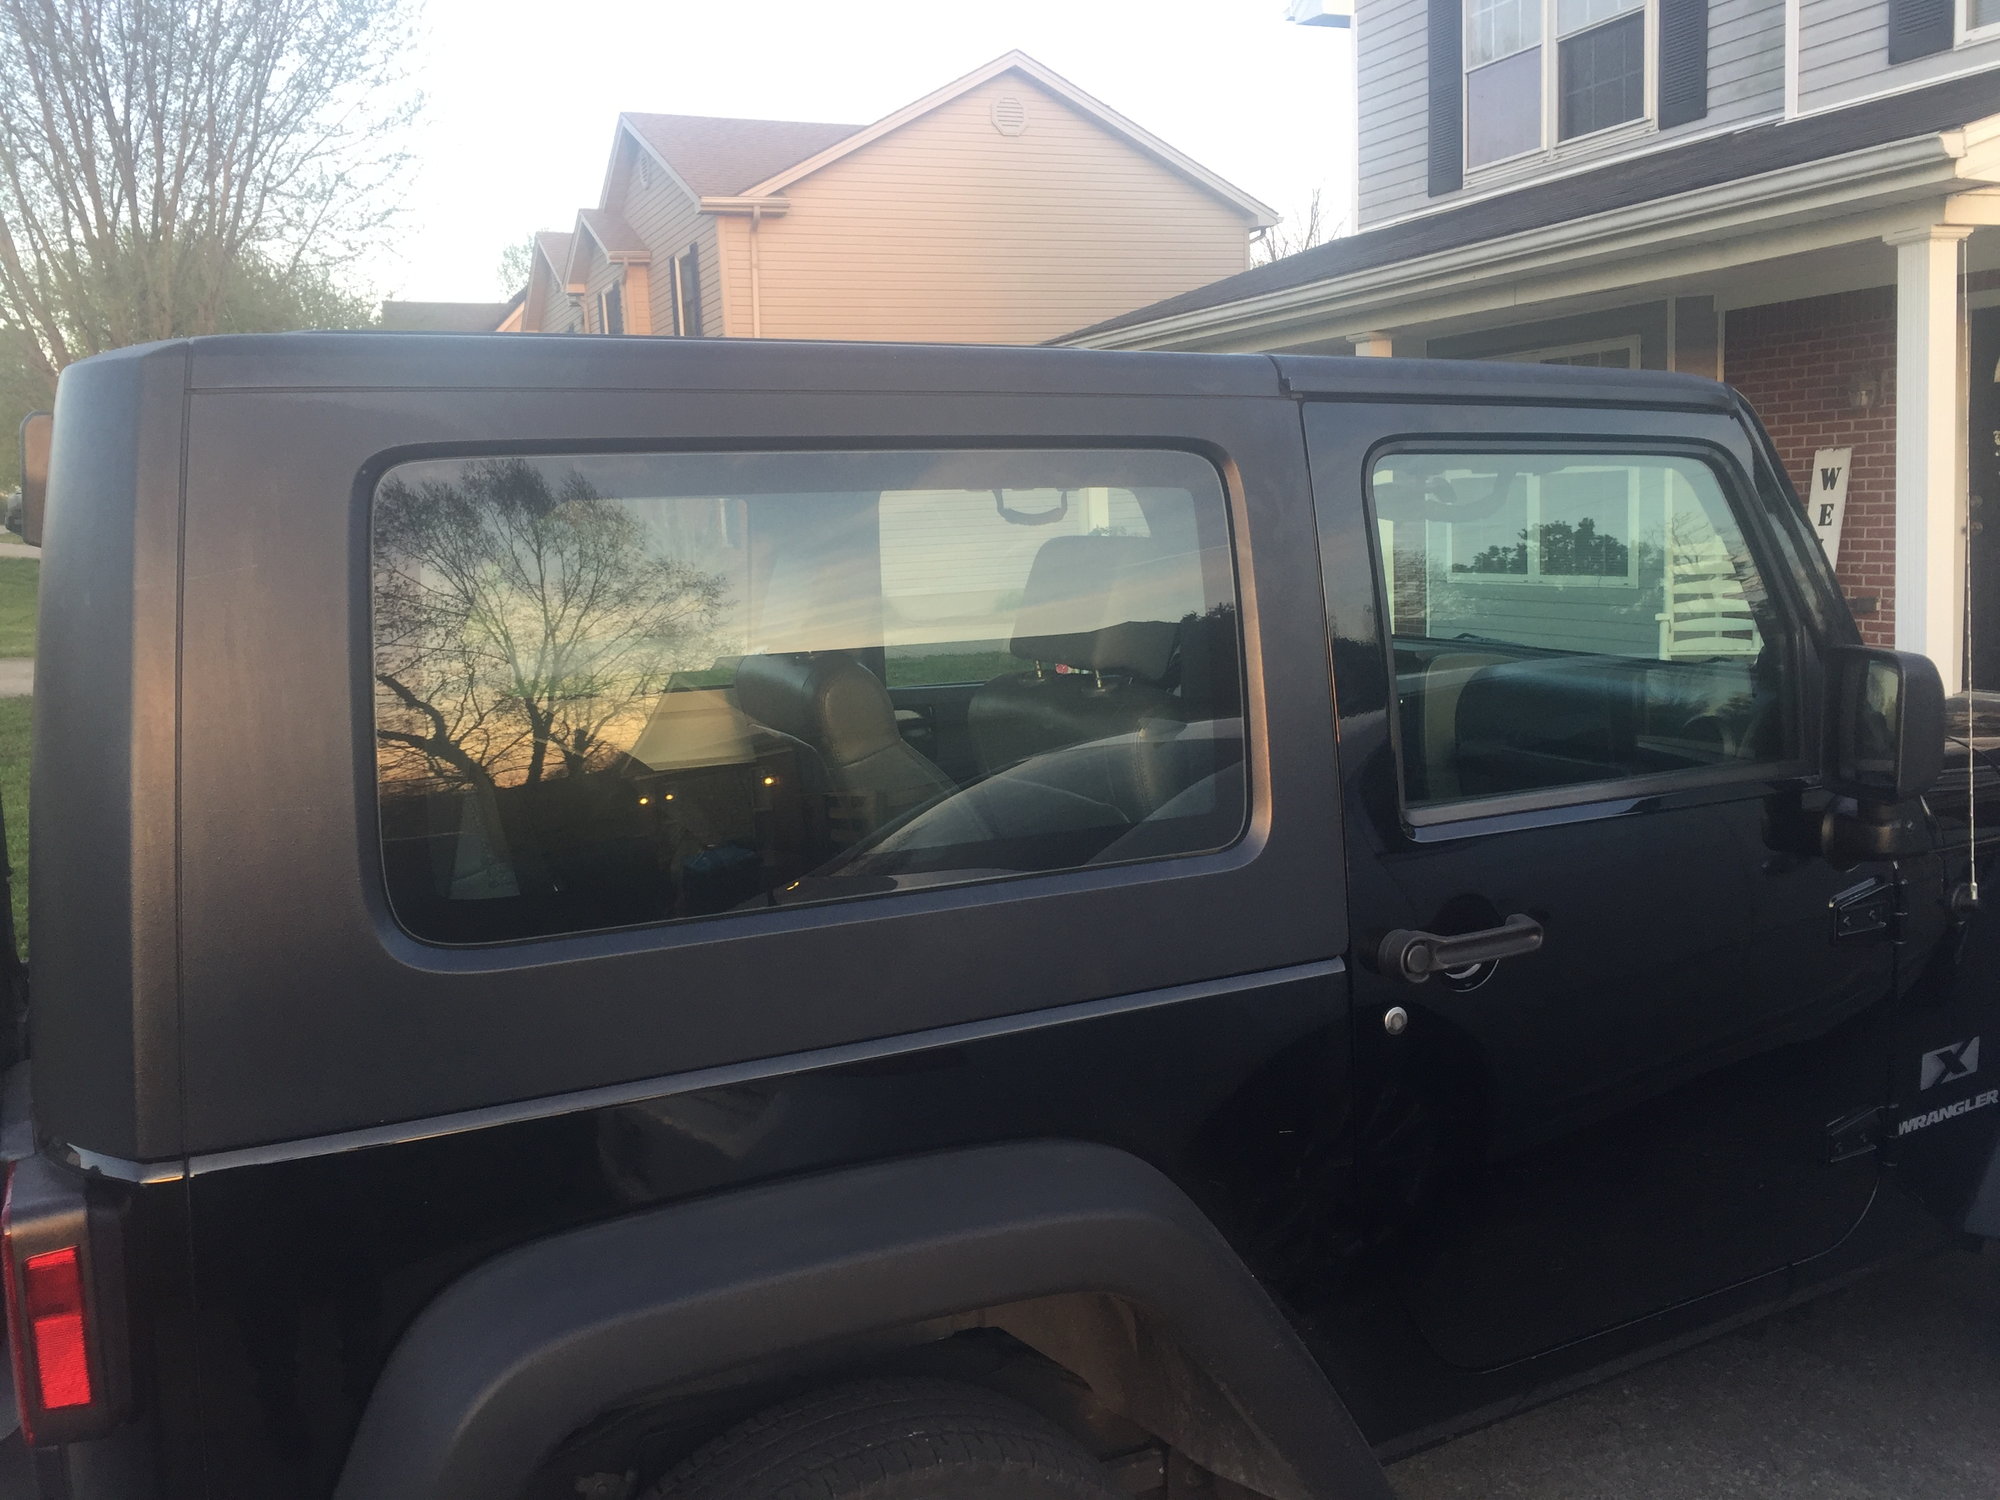 Exterior Body Parts - Hardtop (3 piece Freedom top) from a 2009 2 door JK - Used - 2007 to 2018 Jeep Wrangler - Lawrenceburg, KY 40342, United States